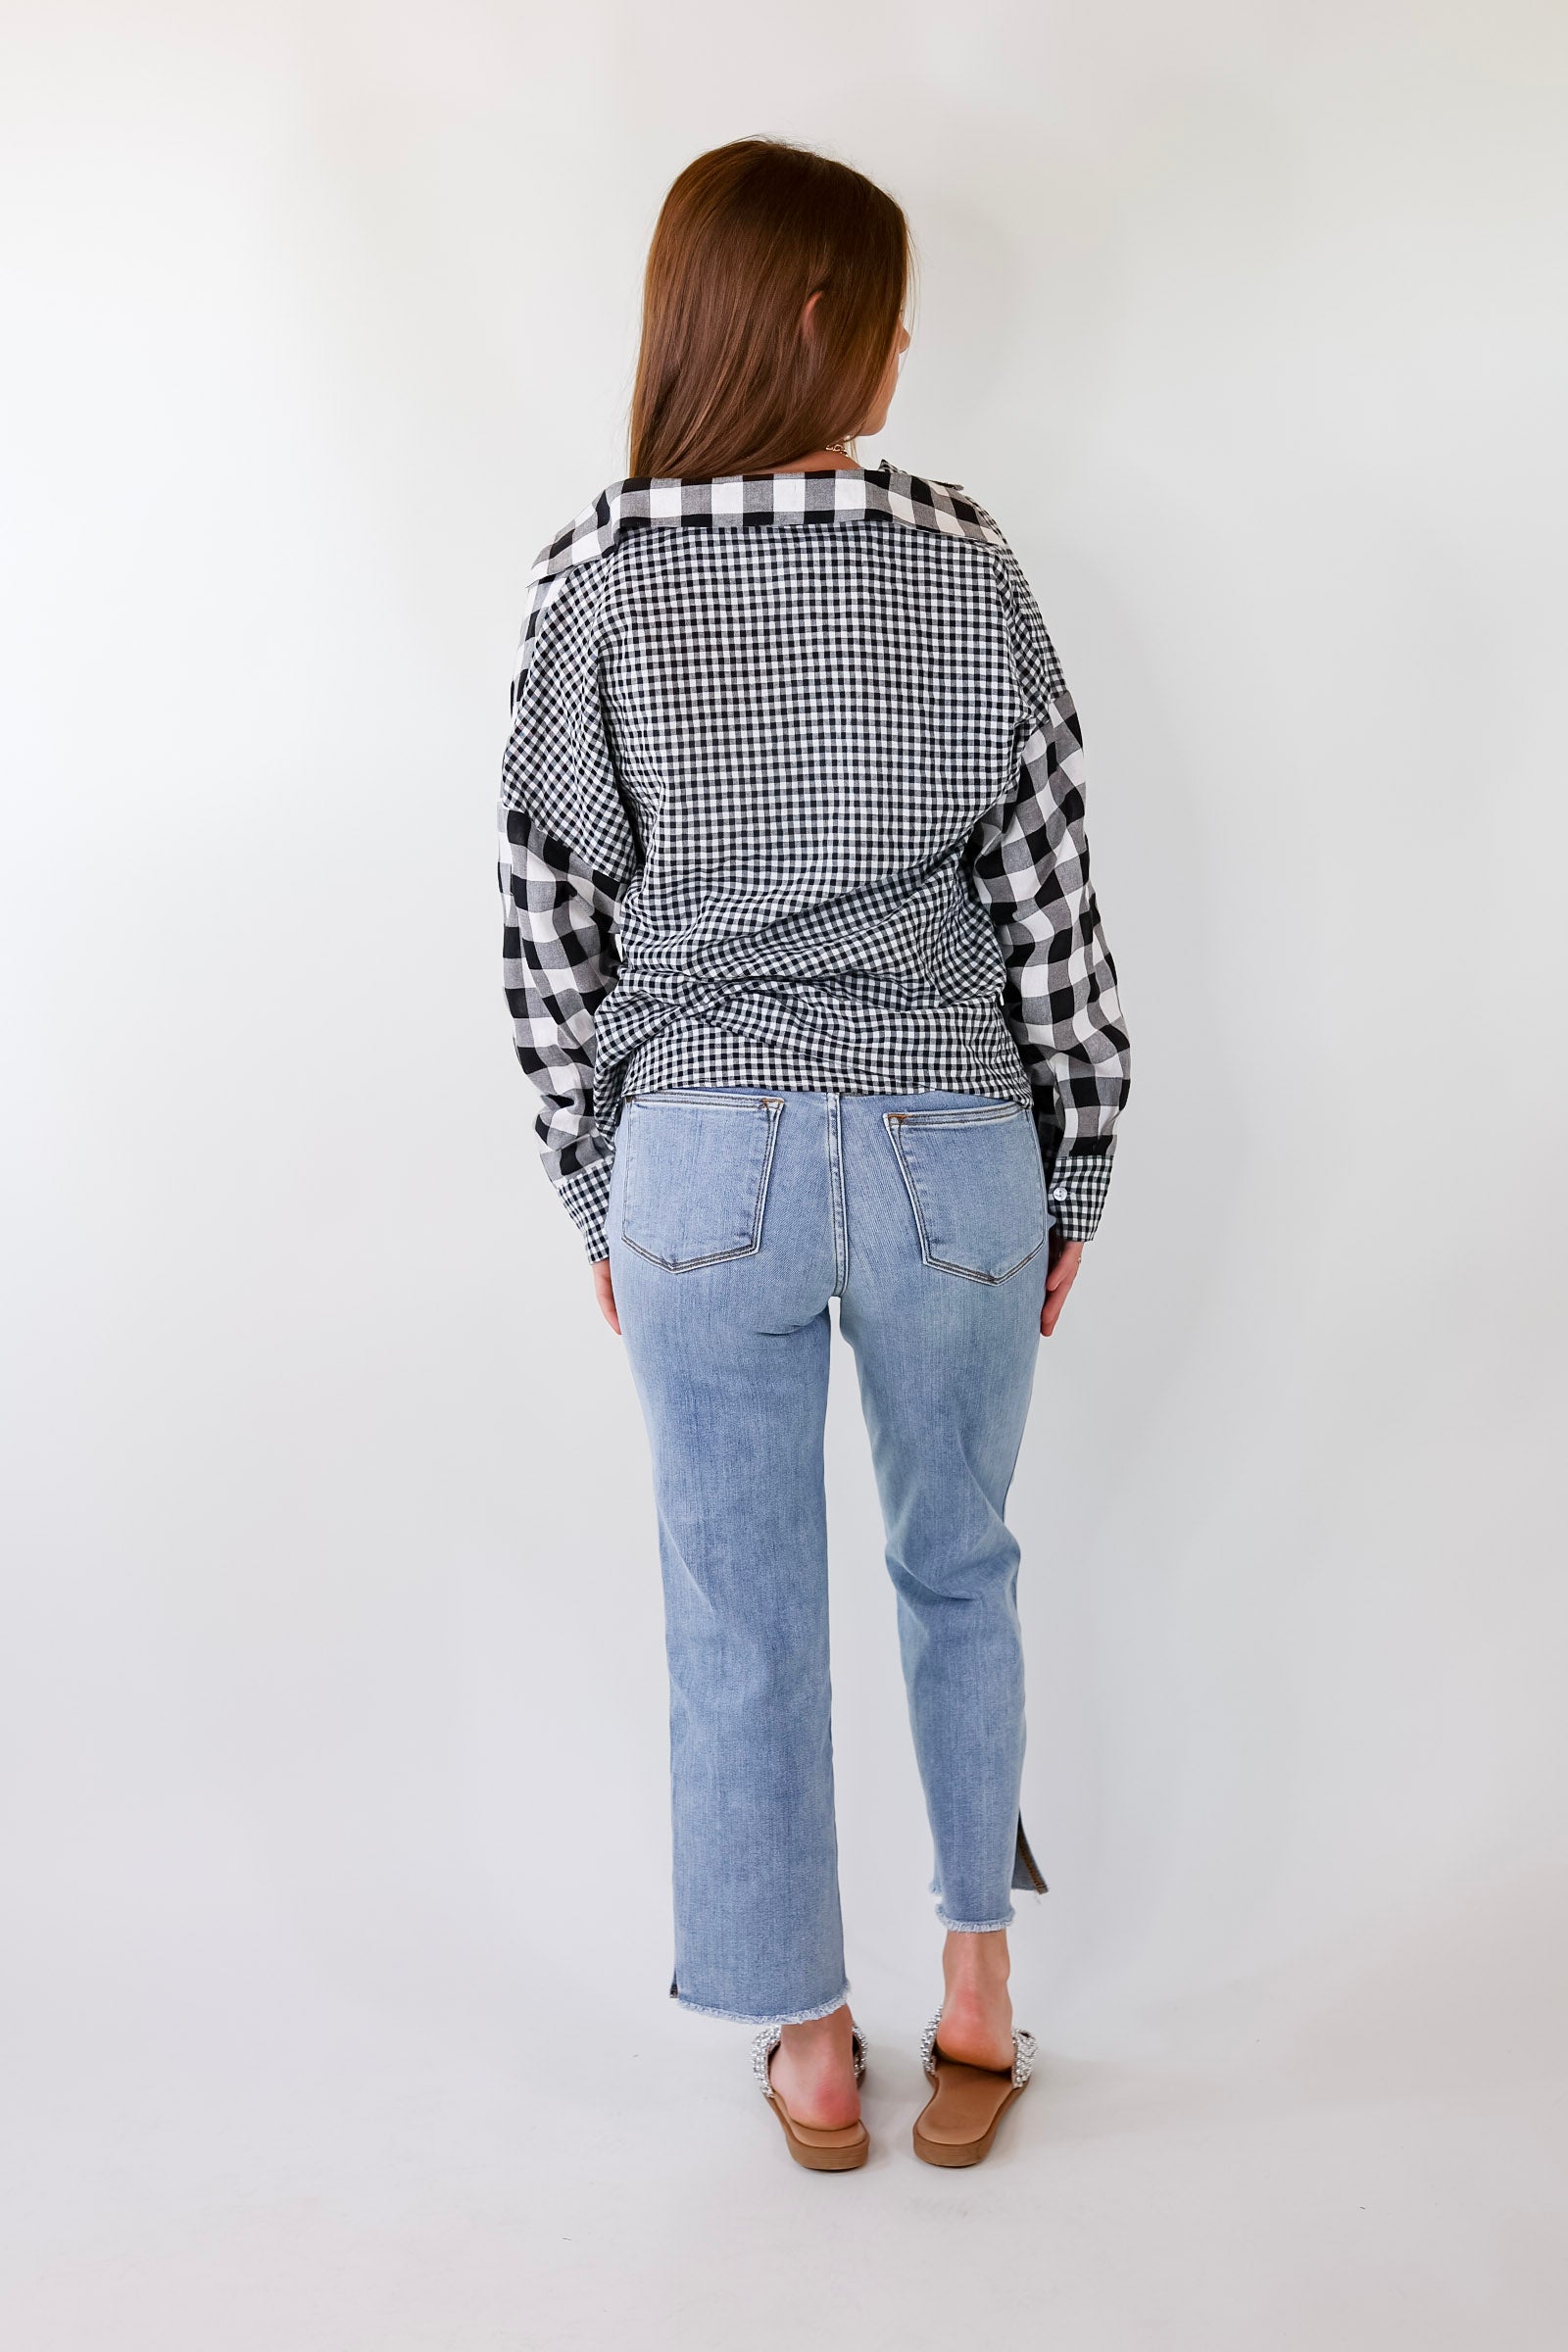 Waiting For You Mix Plaid Button Up Top in Black - Giddy Up Glamour Boutique